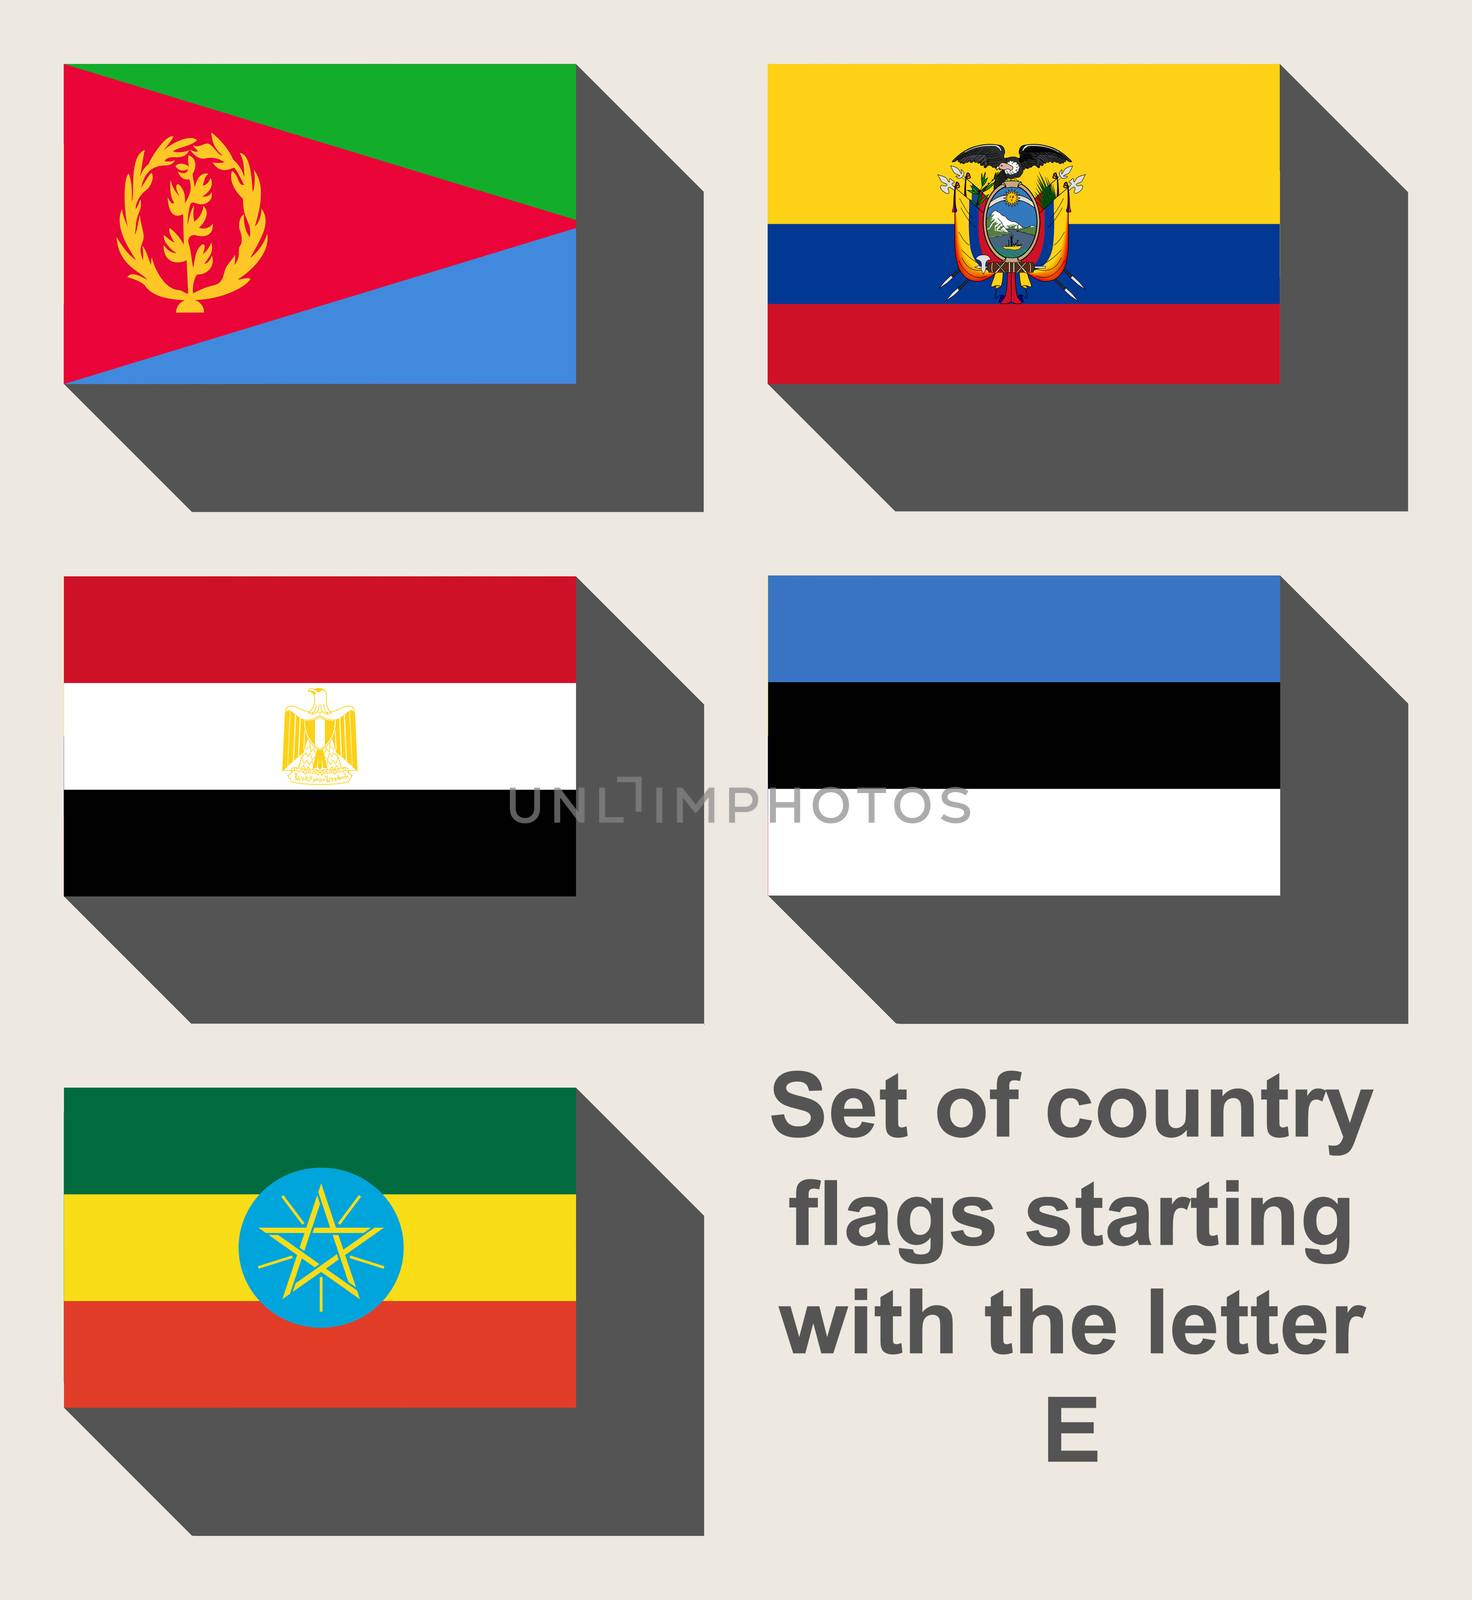 Set of country flags staring with E by speedfighter